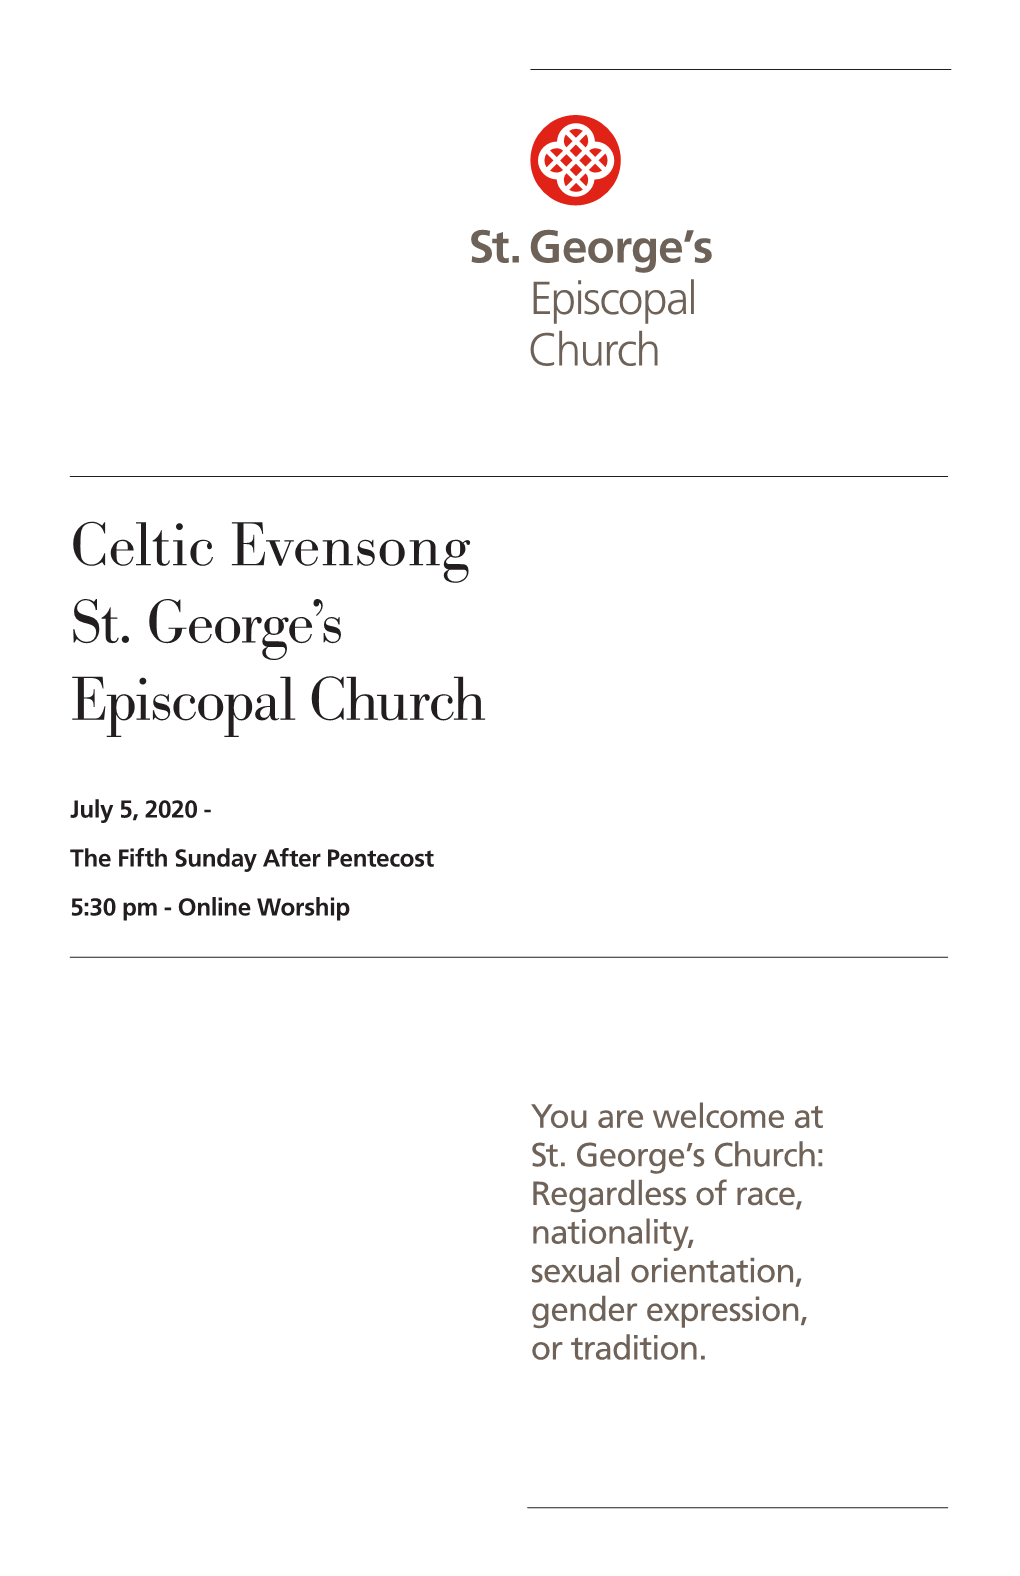 Celtic Evensong St. George's Episcopal Church